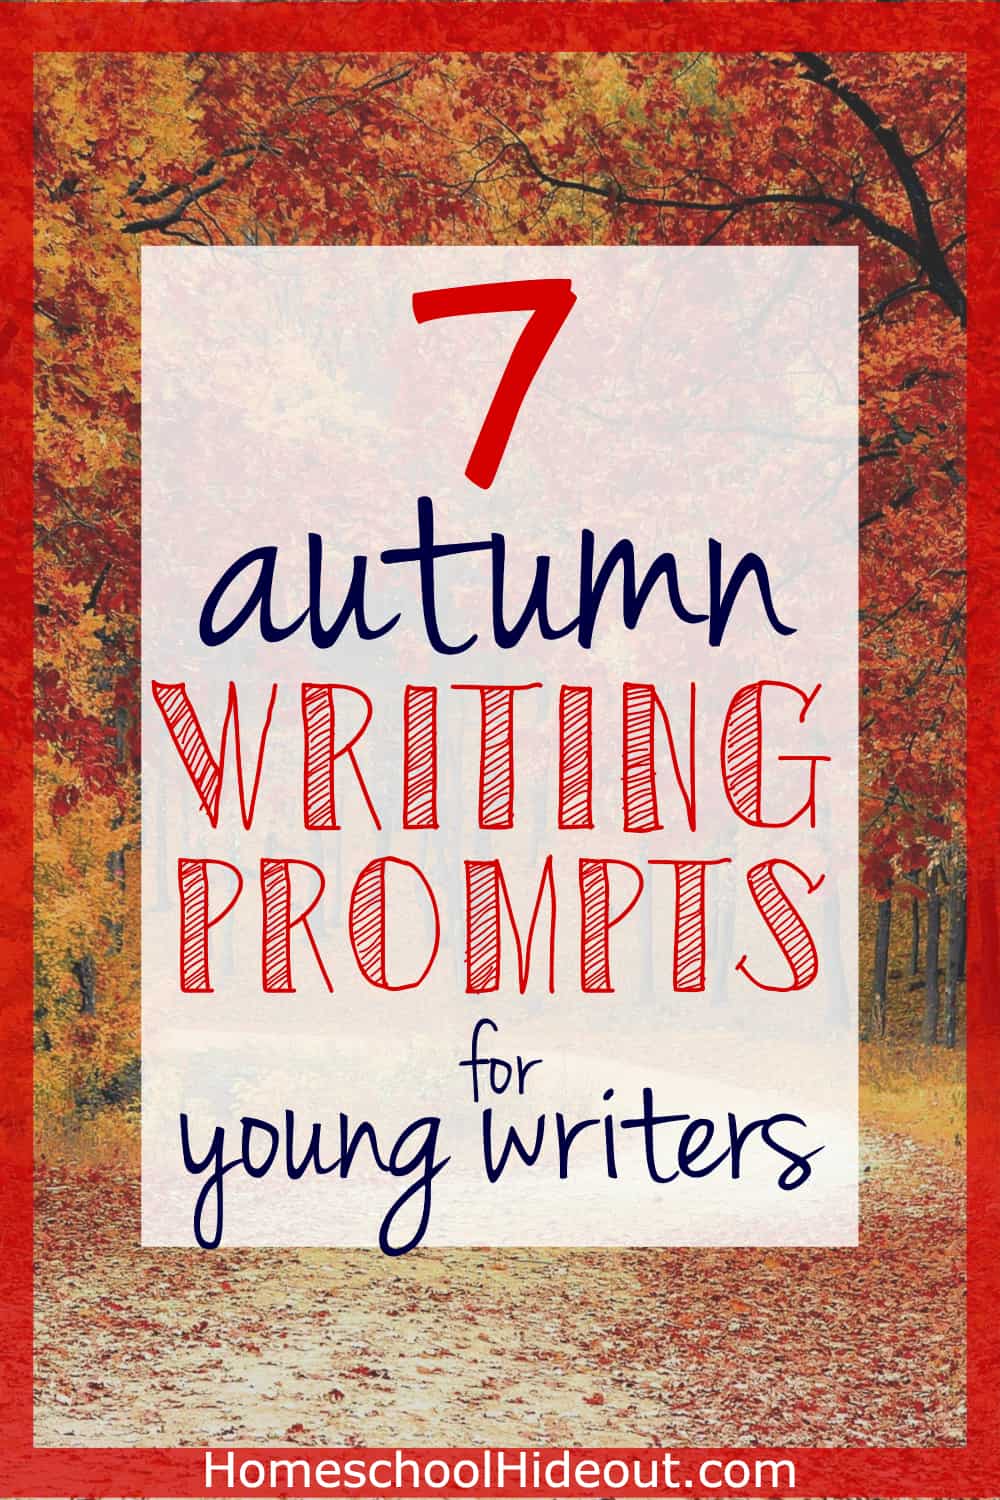 Take in the sights and sounds of fall with these 7 autumn writing prompts. Document the details we all love so much!